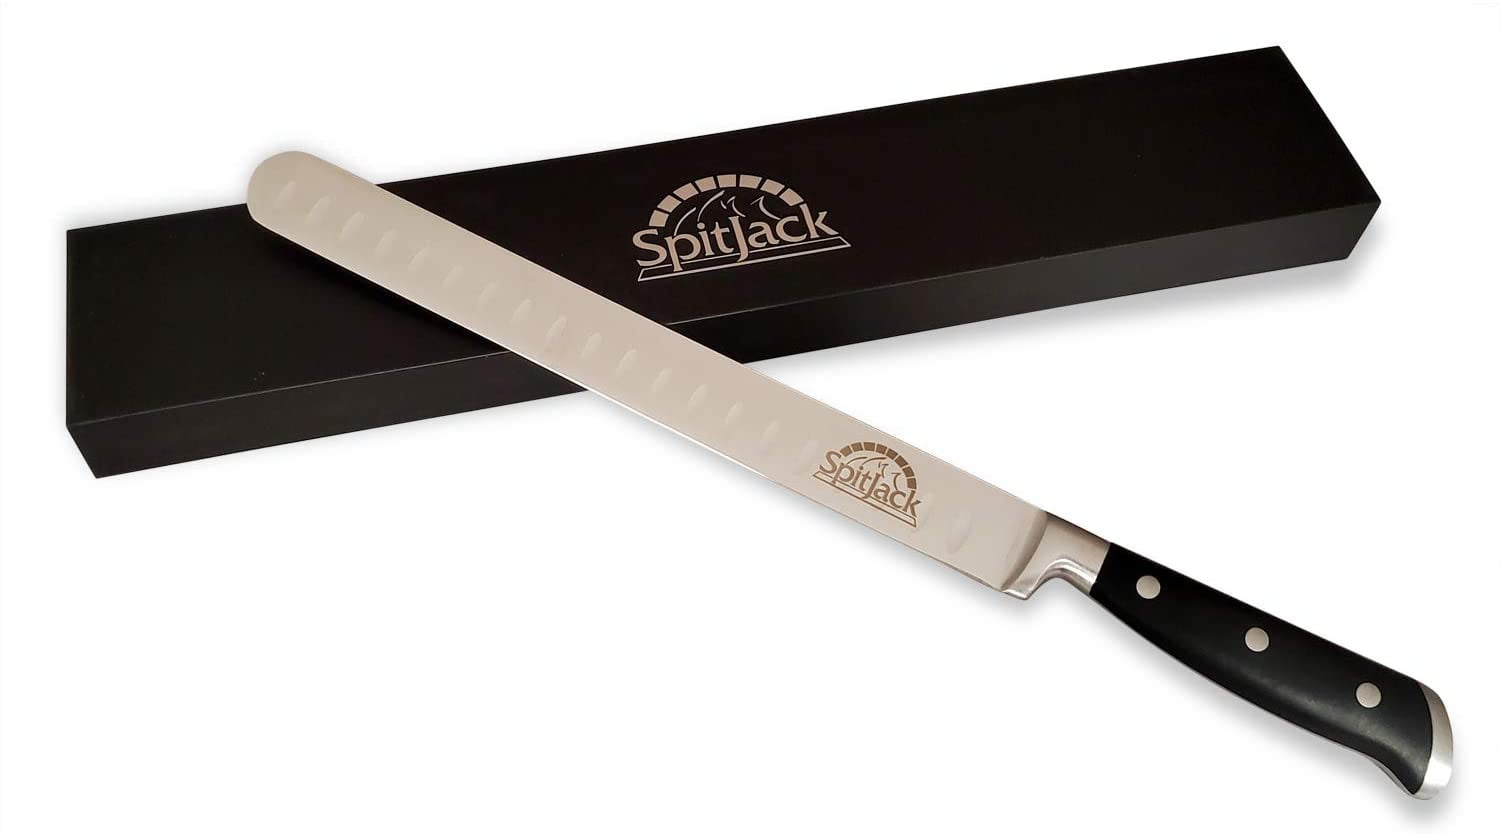 SpitJack Brisket Knife for Meat Carving and Slicing - Stainless Steel,  Granton Edge, 11 Inch Blade, BBQ Competition-Chef Series 